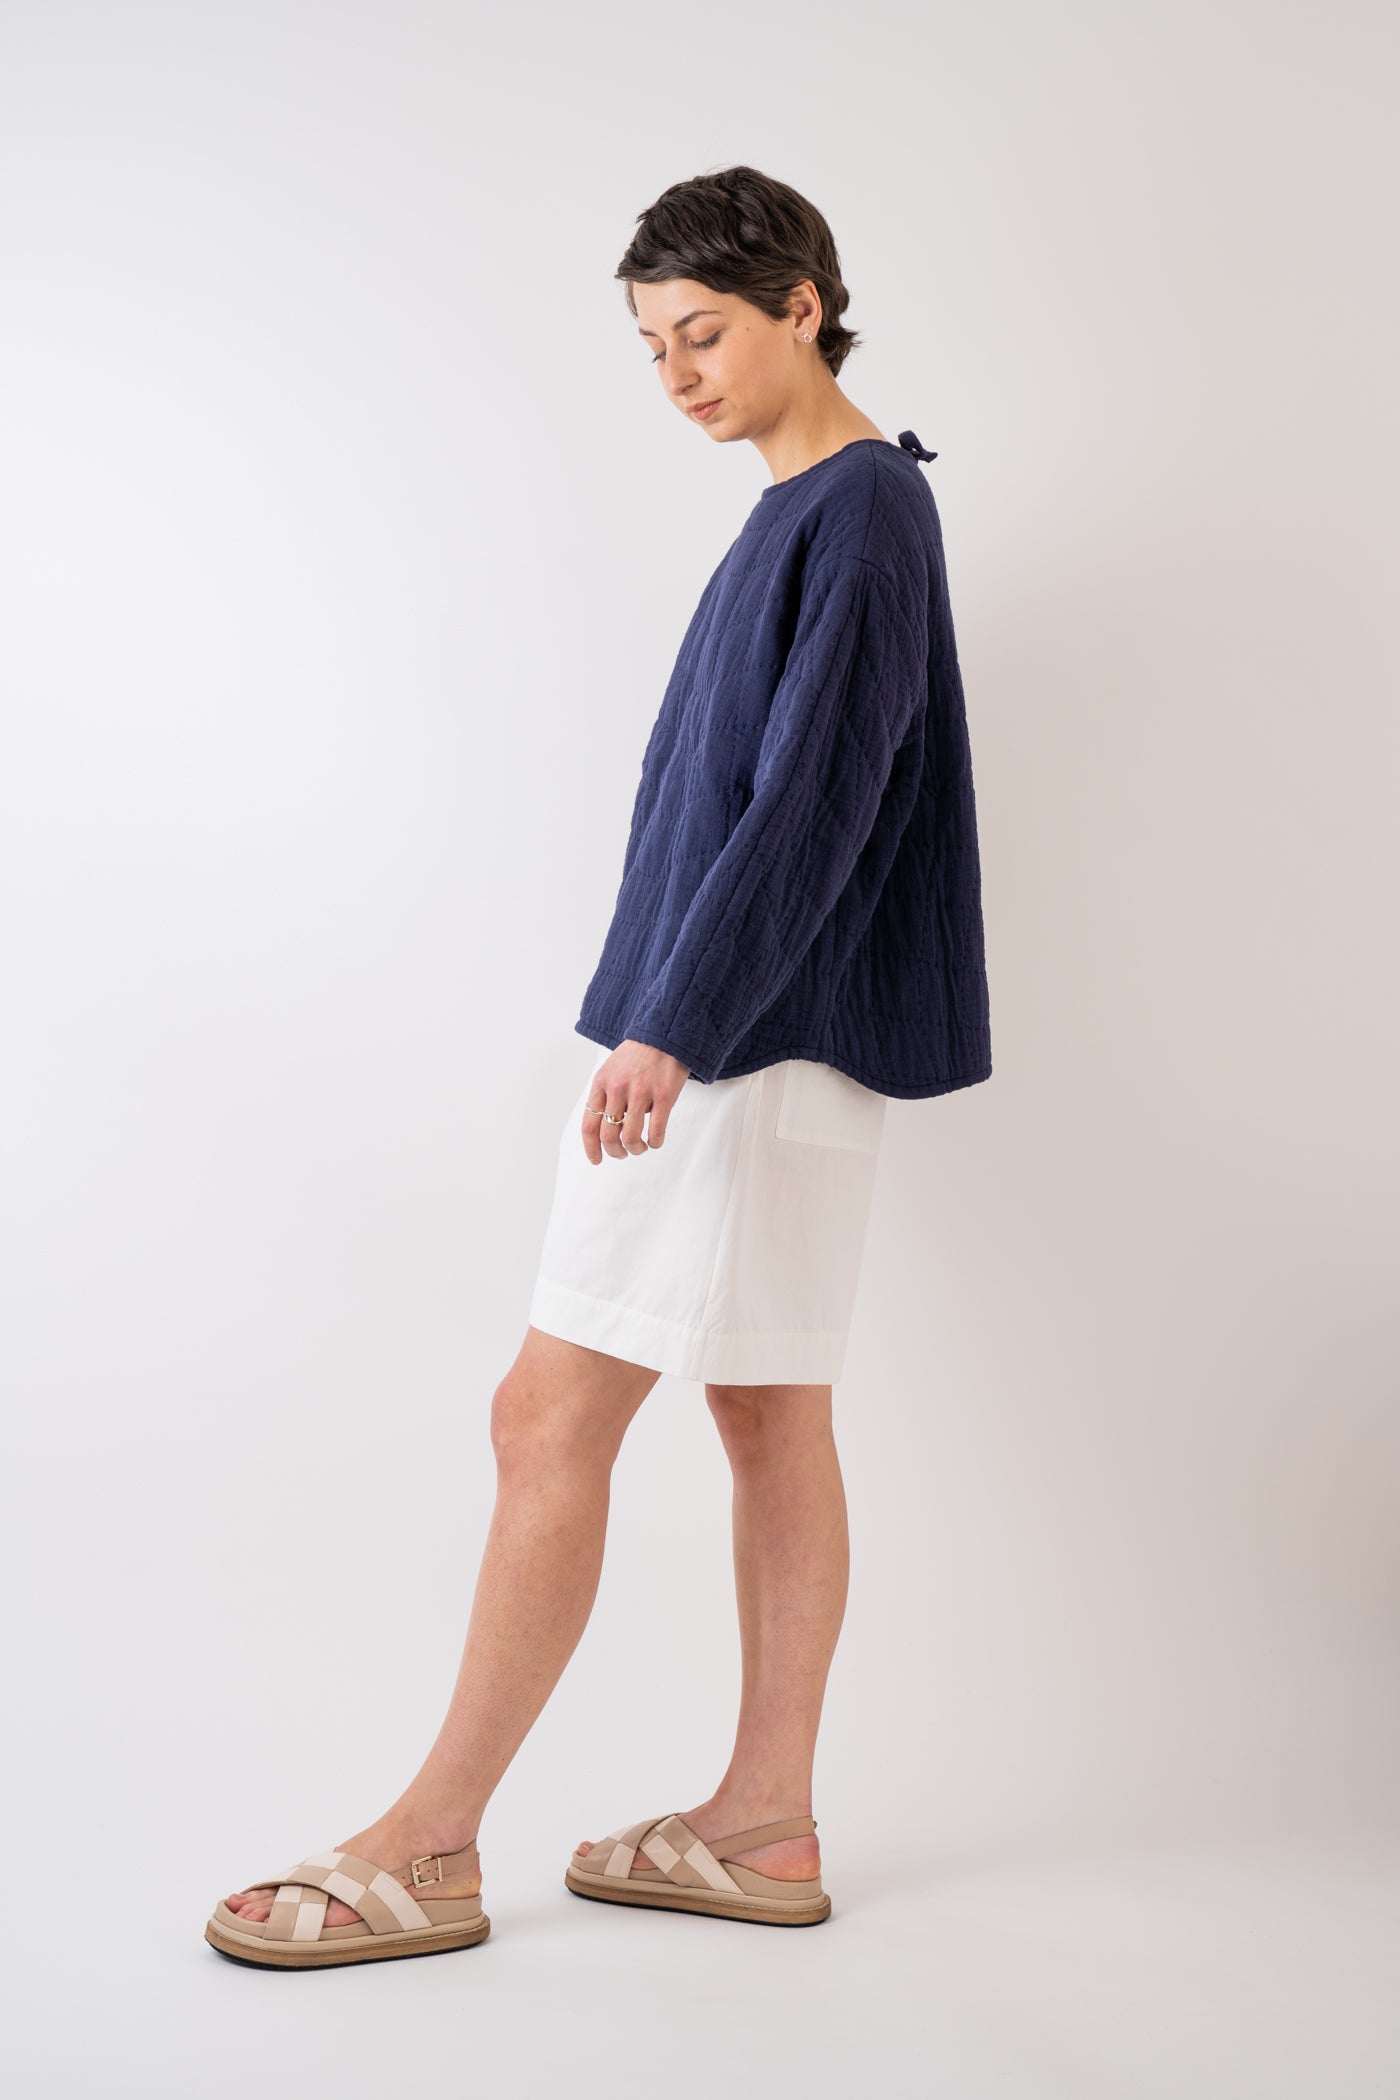 Xi Atelier Oeko-Tex Certified Cotton Bodhi Hand Quilted Top styled with Cawley Studio Cotton Linen Hilda Short